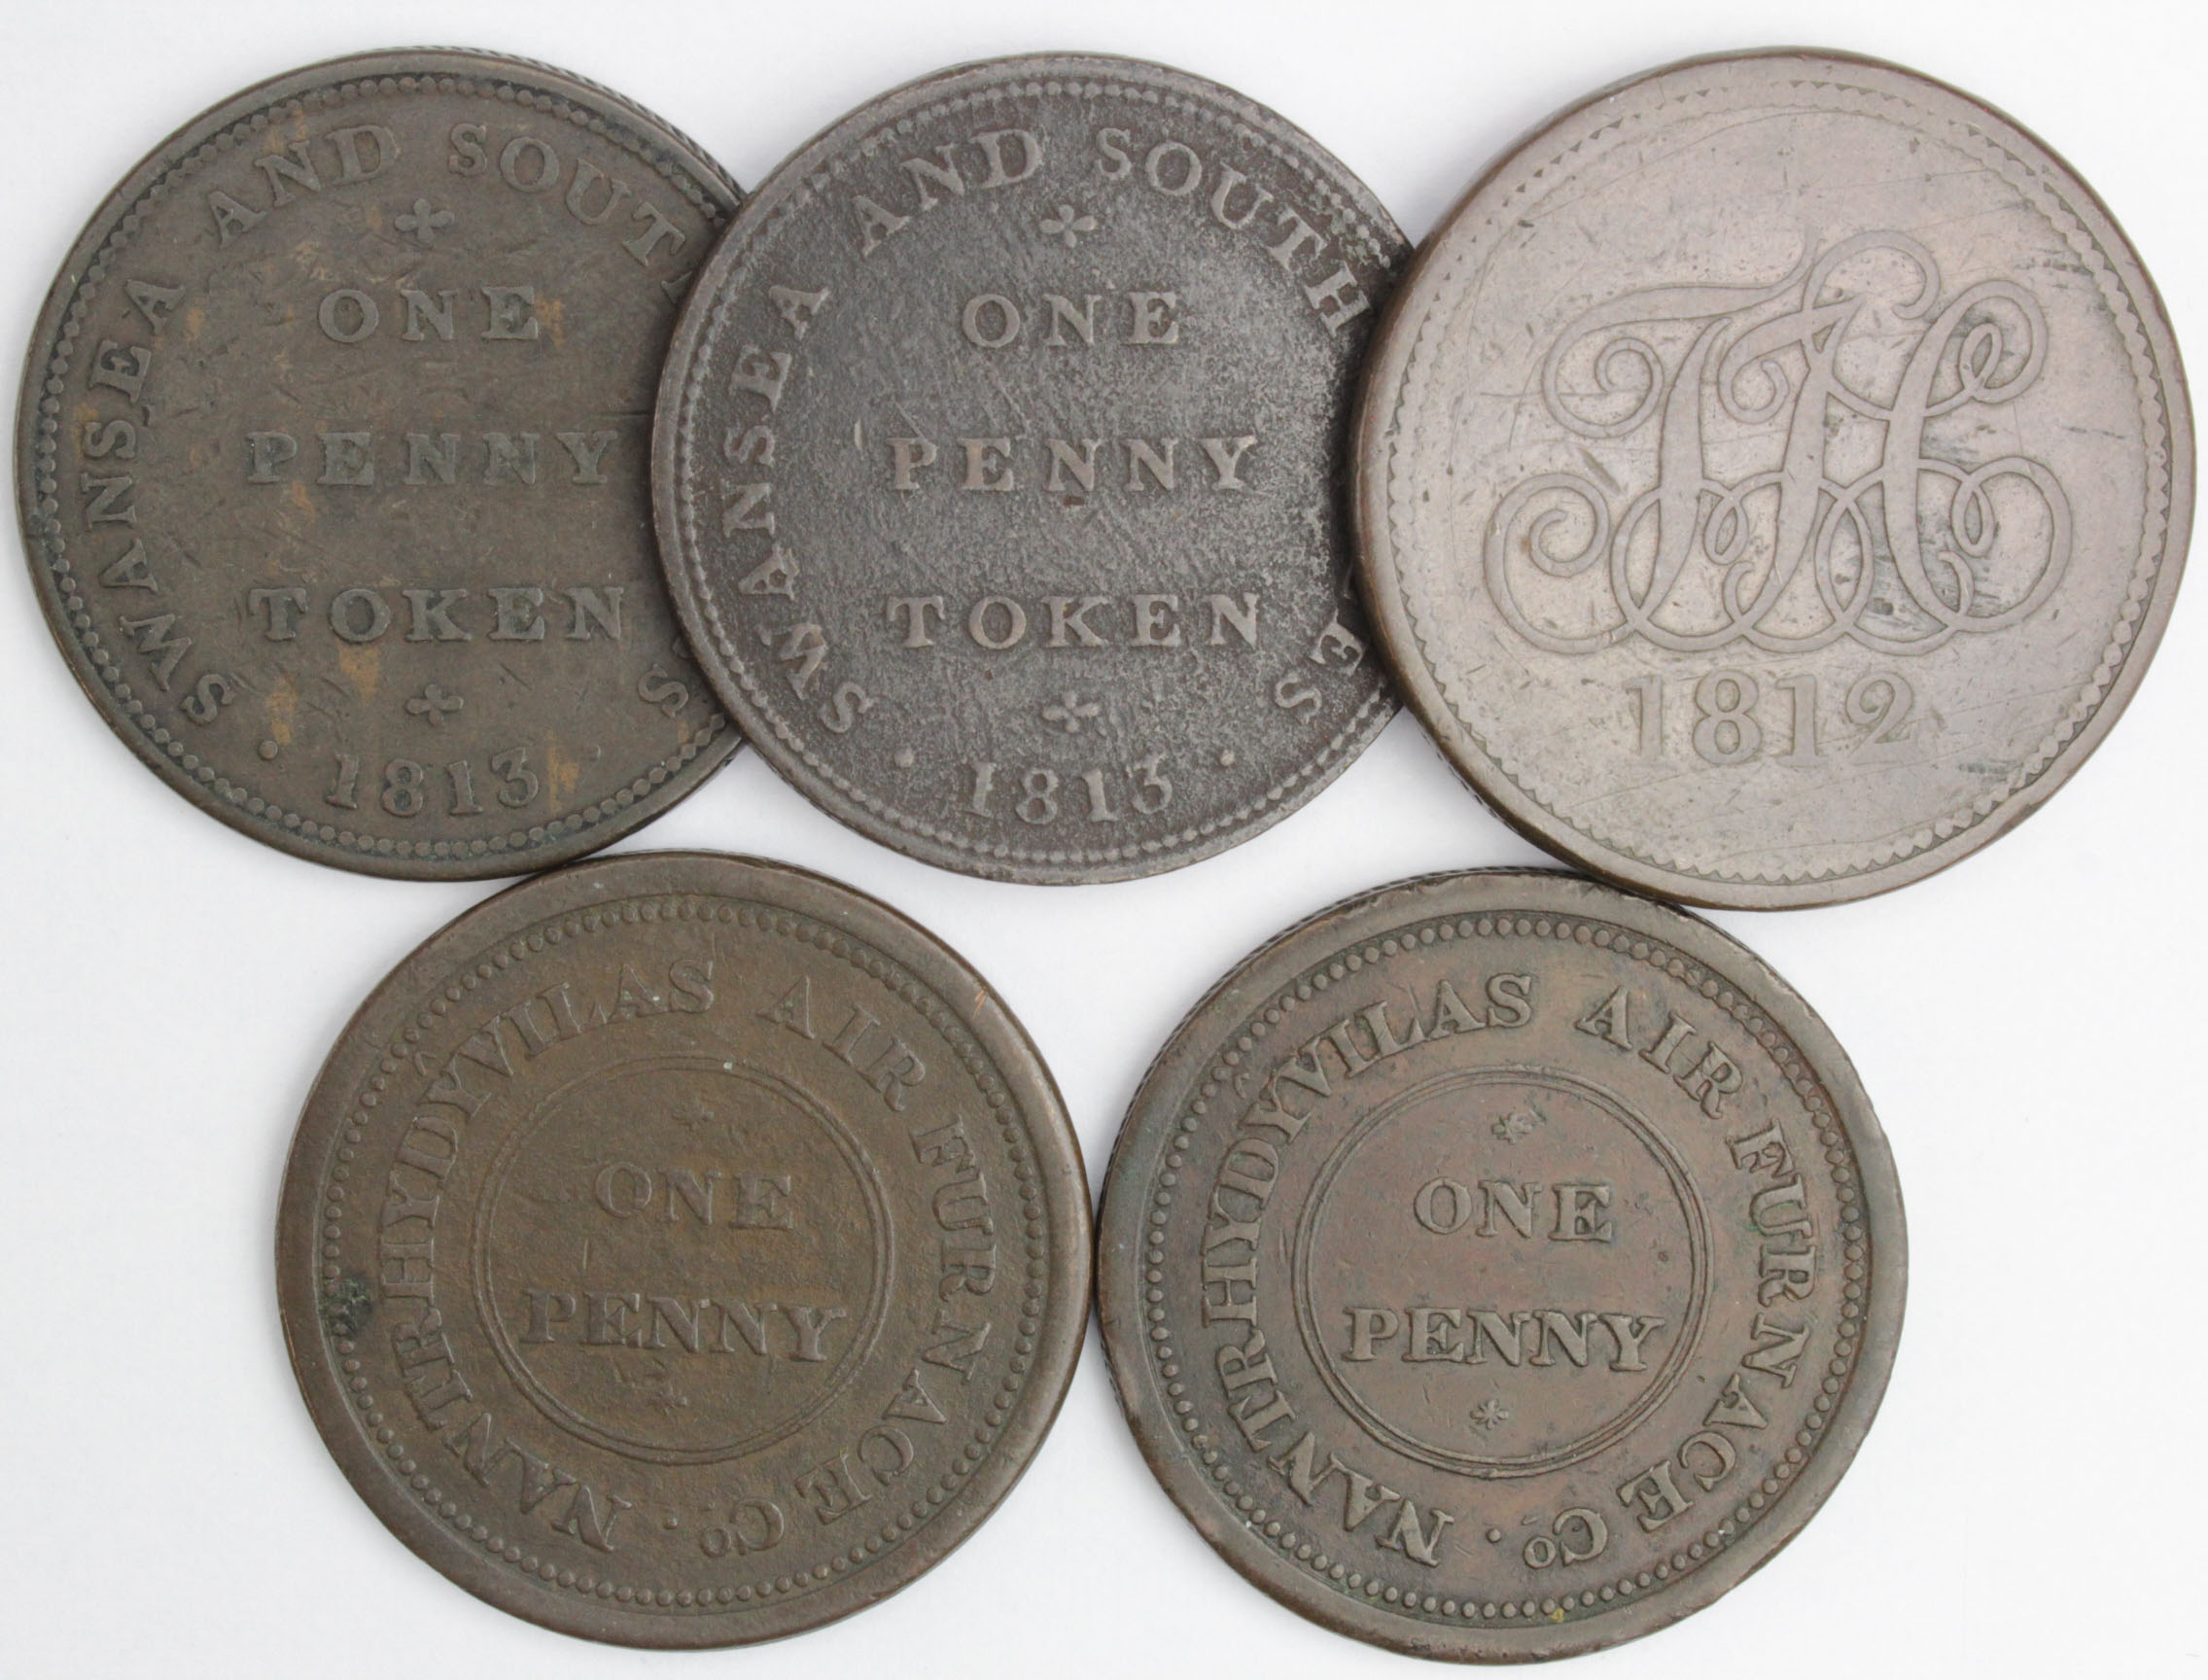 Welsh 19thC Copper Tokens (5) : 2x Cambrian Pottery, Swansea Pennies 1813 Davis 20, Withers 1337,